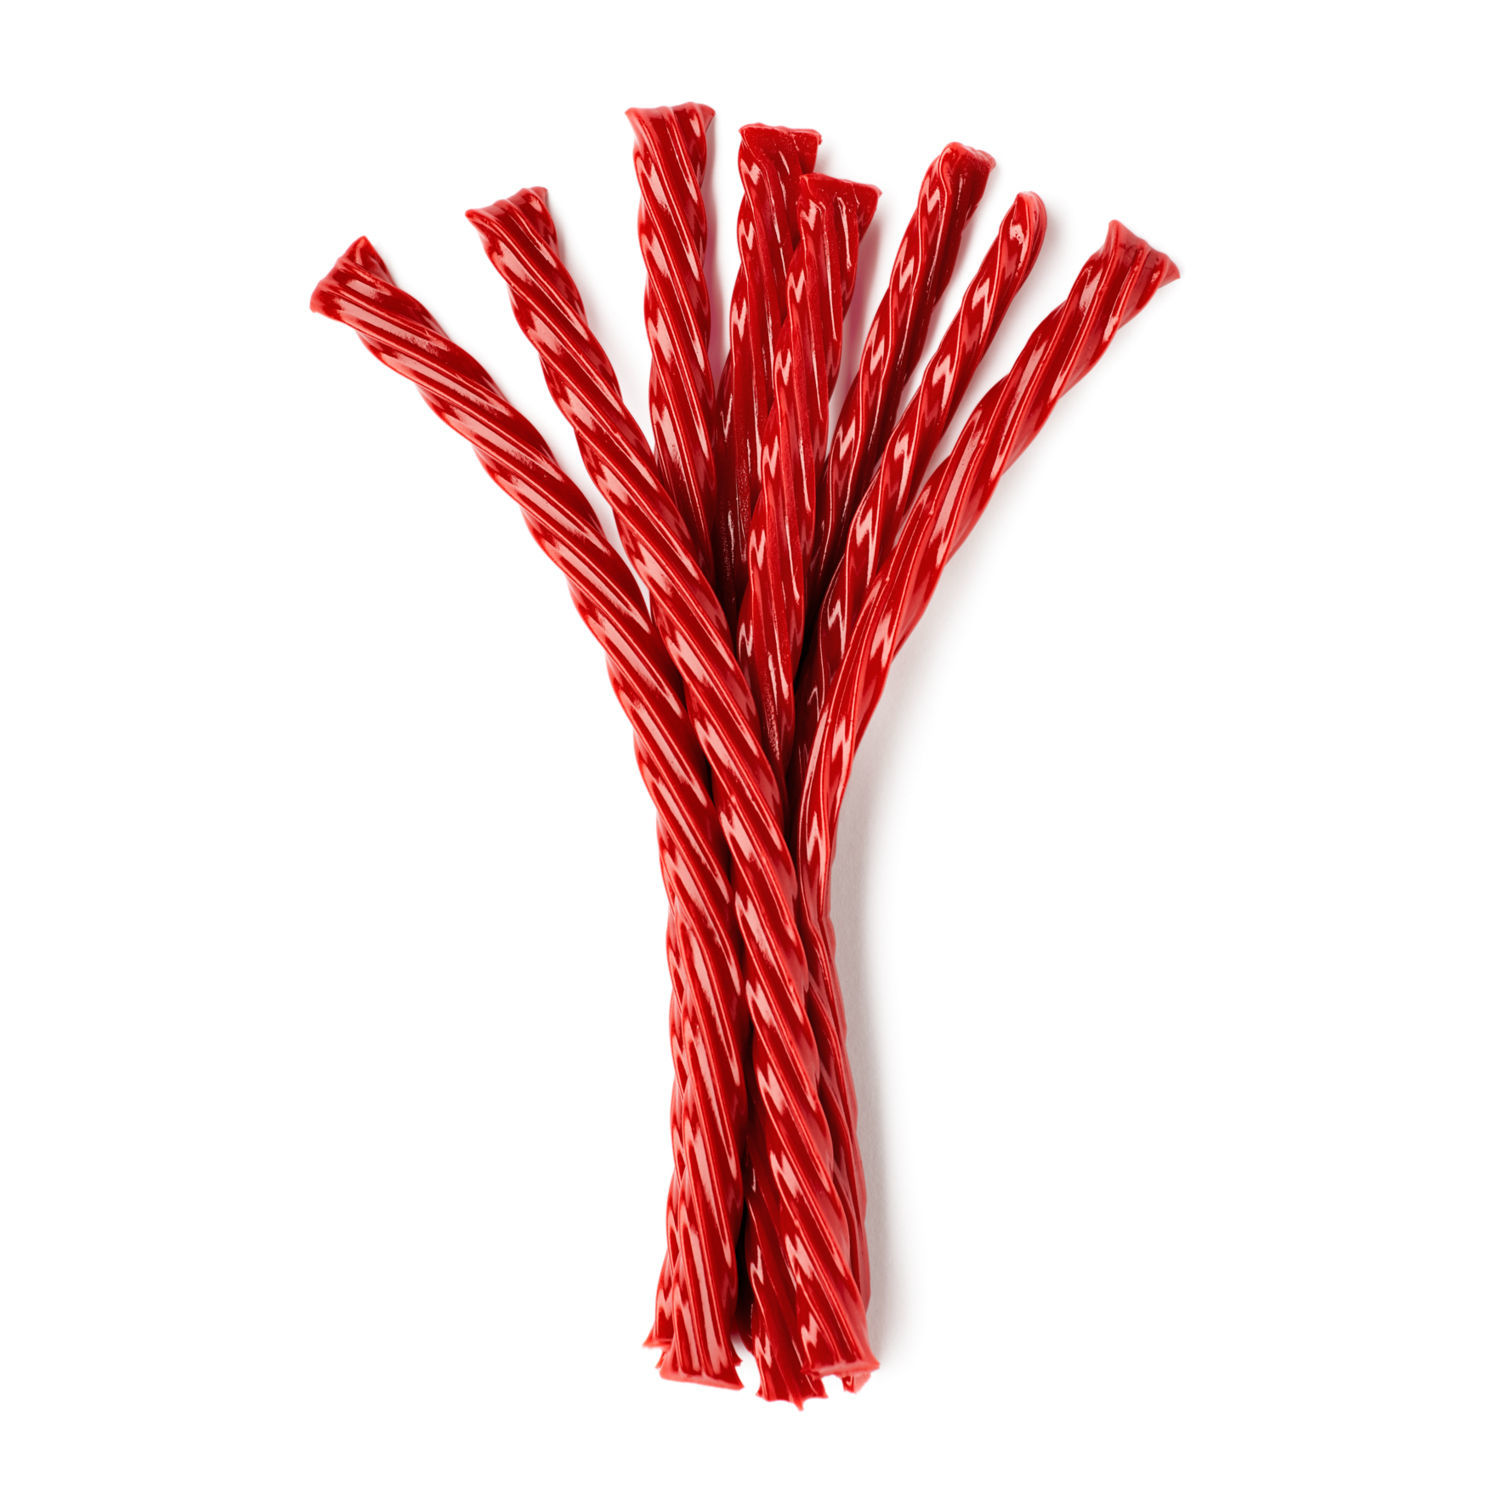 Twizzlers Twists Strawberry Flavored Licorice Style Low Fat Candy, Big Bag 32 oz - image 4 of 9